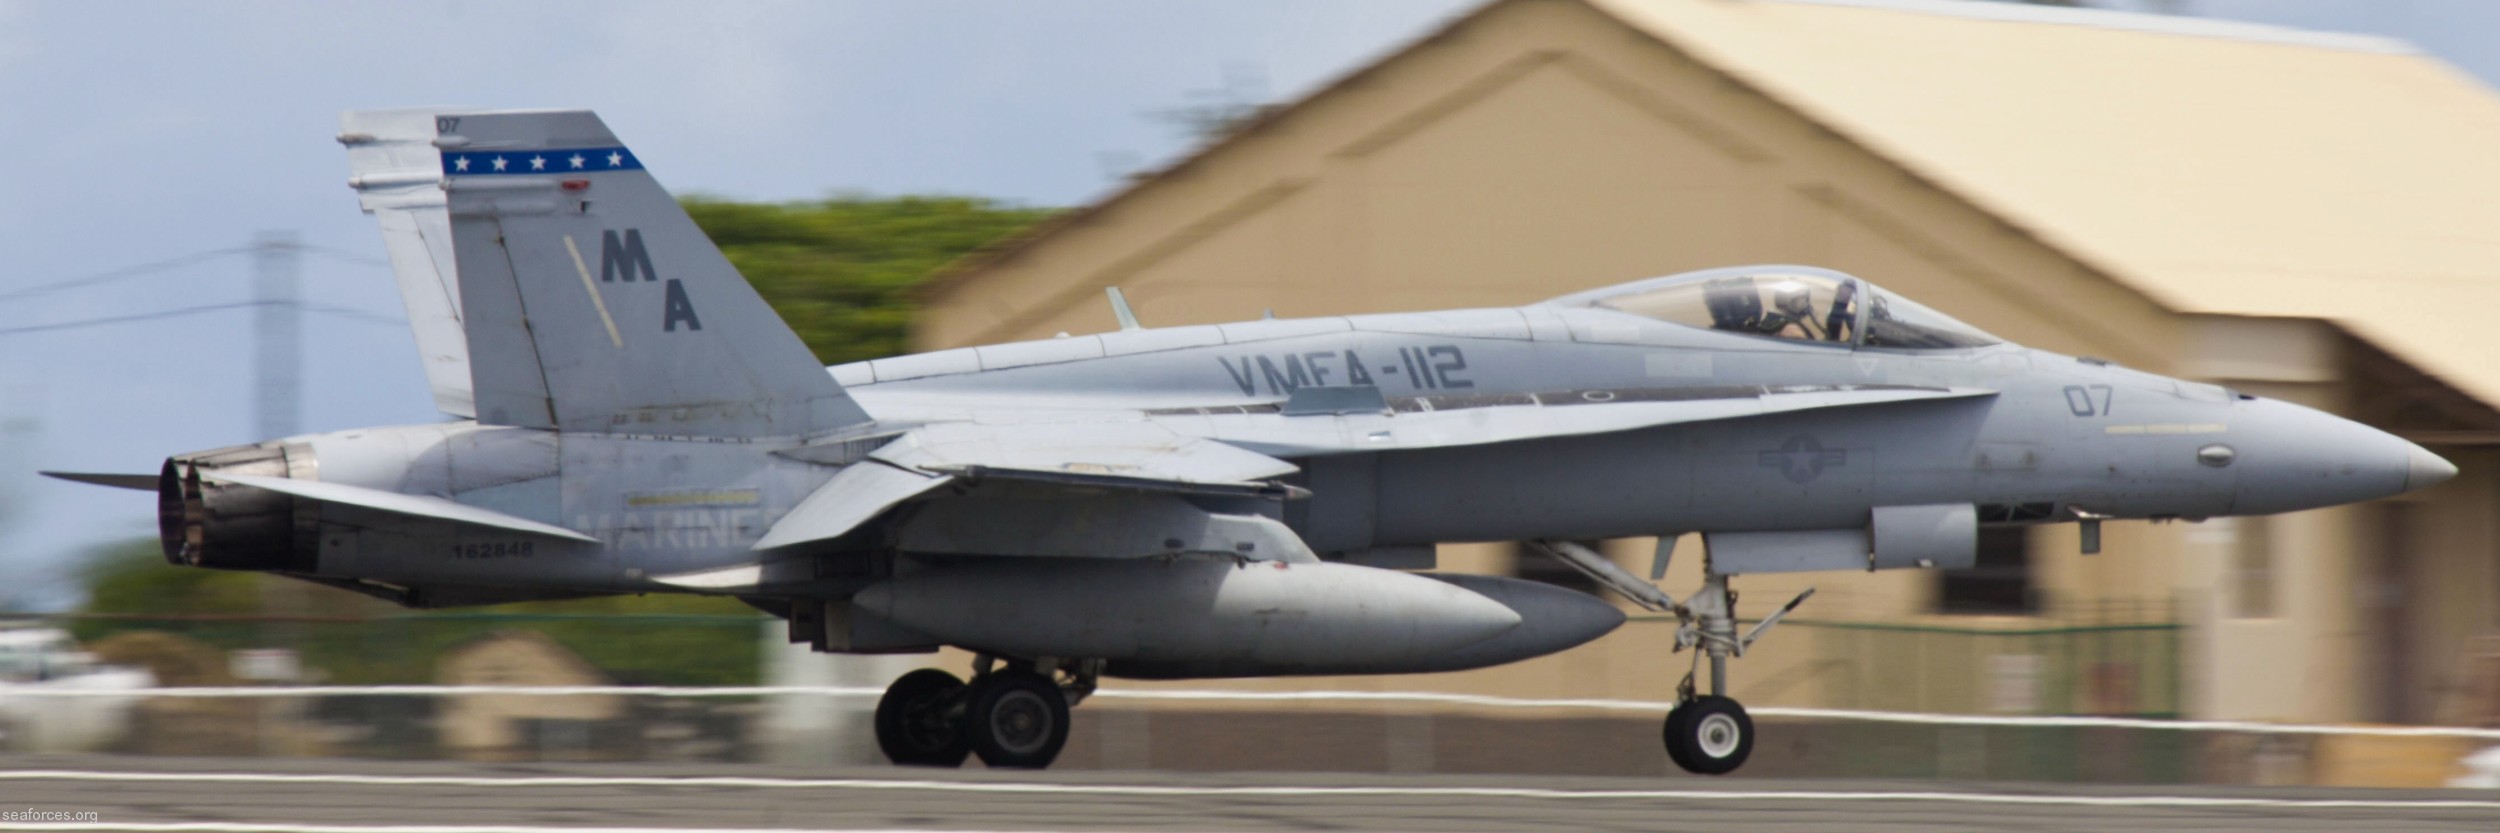 vmfa-112 cowboys marine fighter attack squadron f/a-18a+ hornet 13 mcas kaneohe bay hawaii